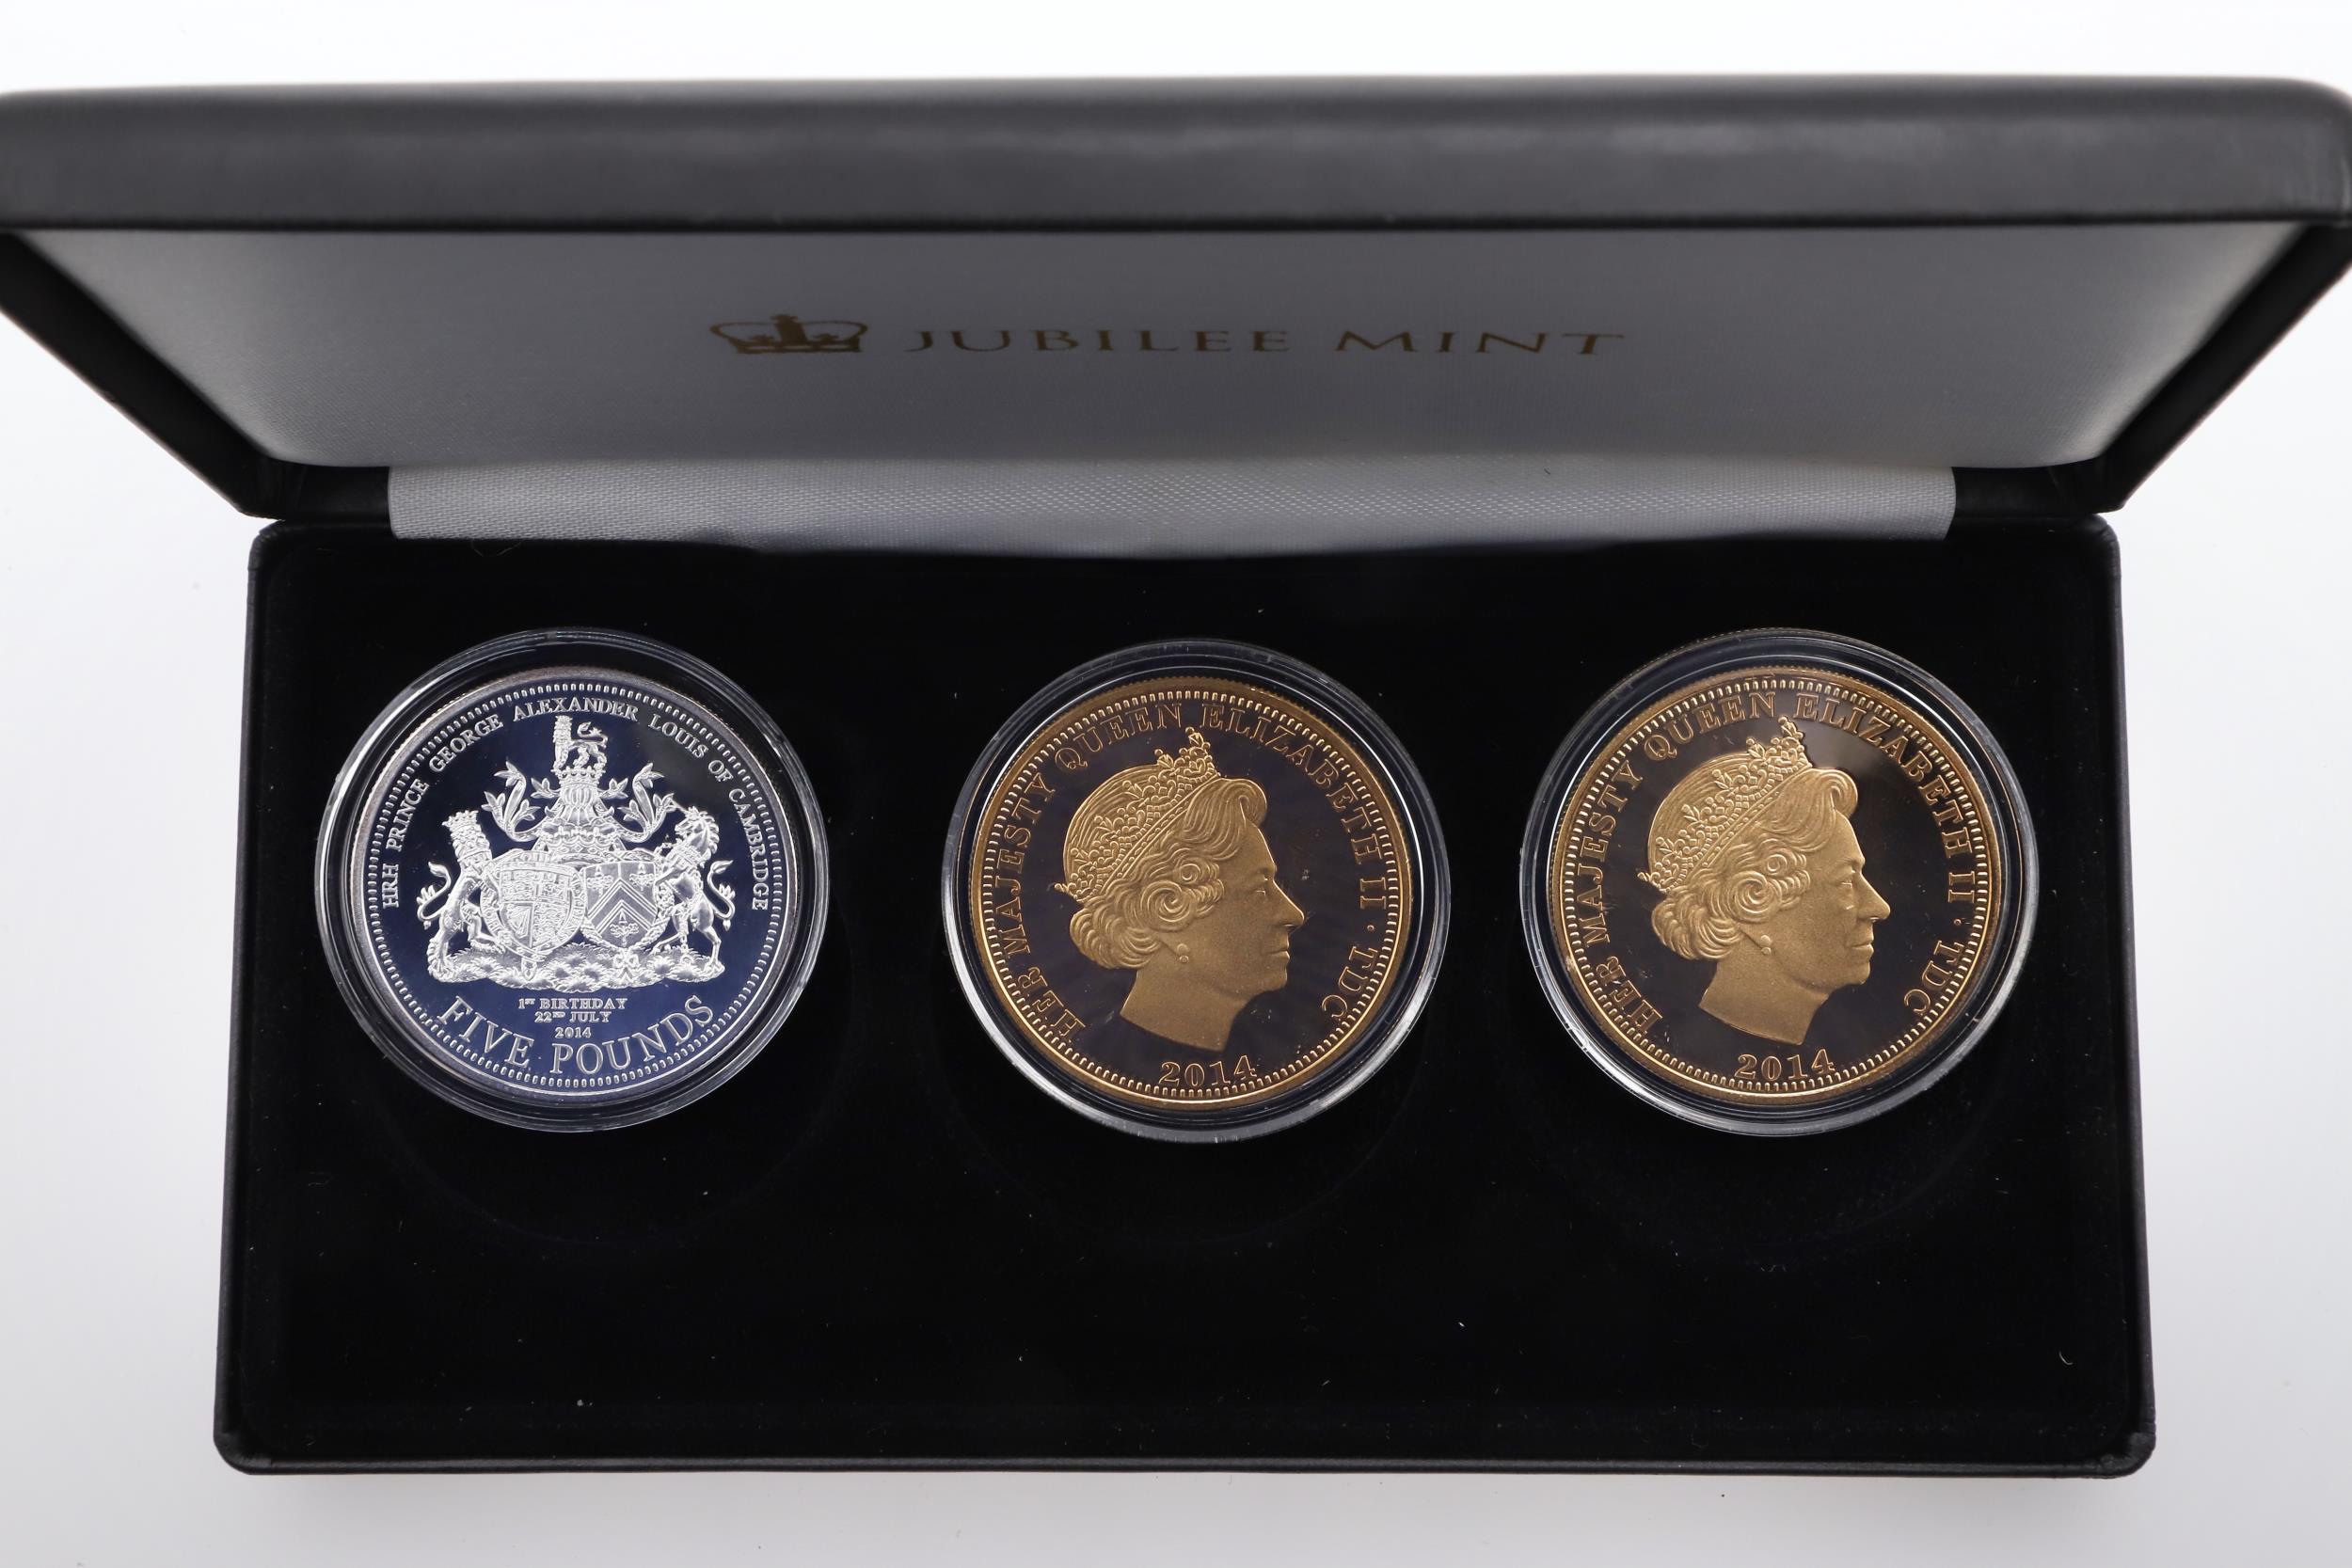 THREE JUBILEE MINT THREE COIN SILVER PROOF ROYALTY THEMED ISSUES, 2014, 2016 AND 2018. - Image 4 of 10